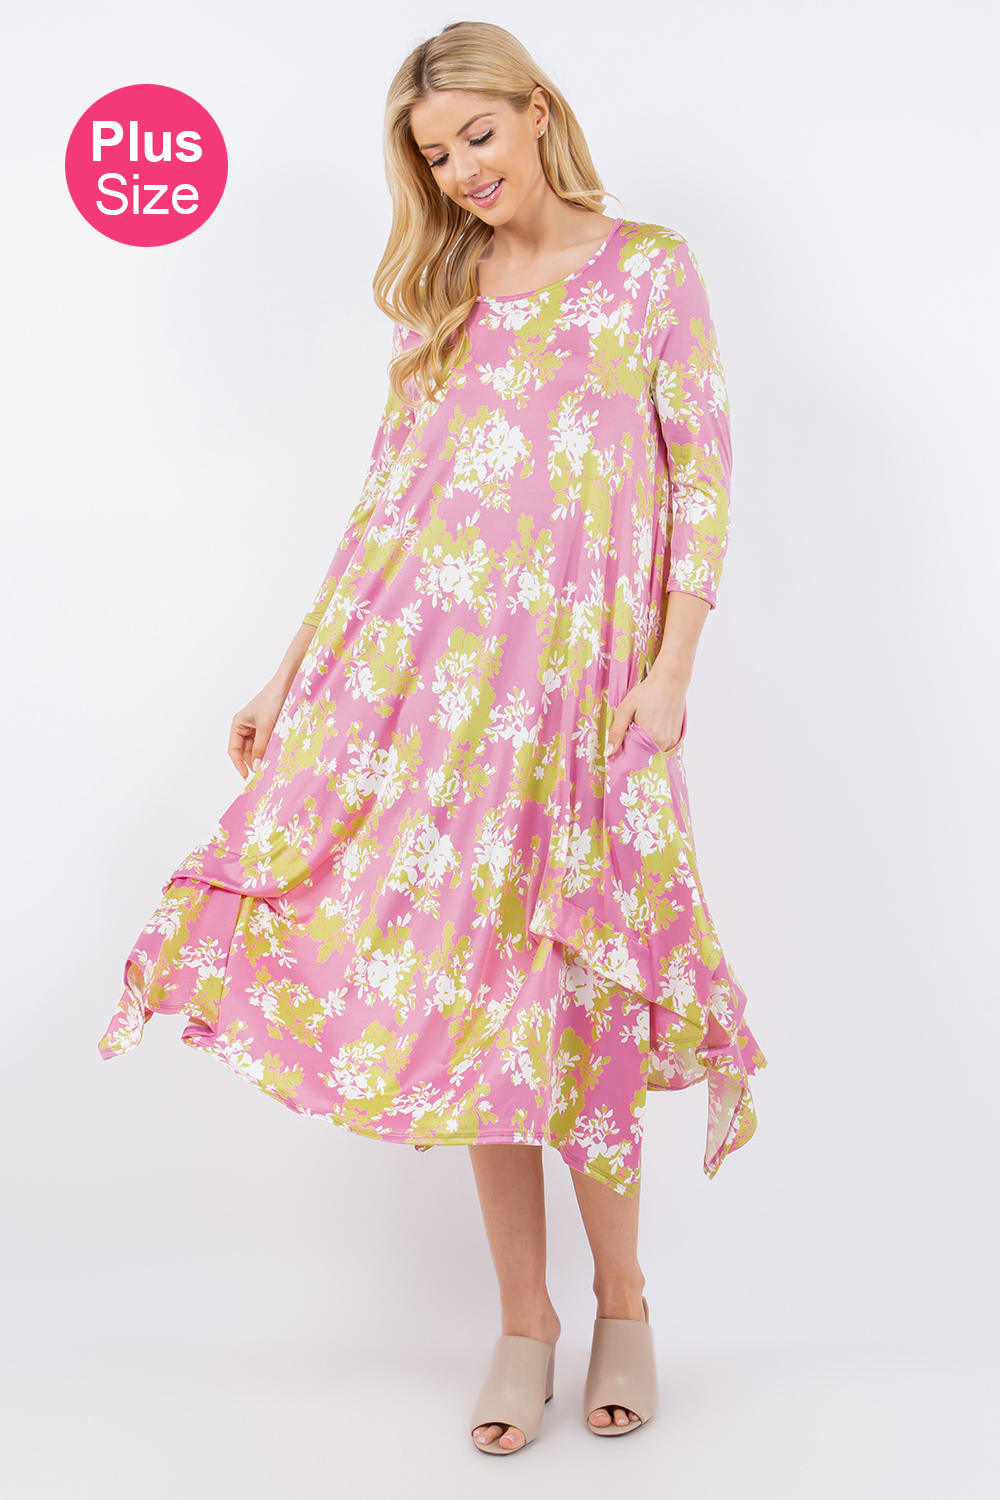 CD43771G-PL<br/>PLUS FLORAL PRINT LAYERED BOTTOM DRESS WITH POCKETS